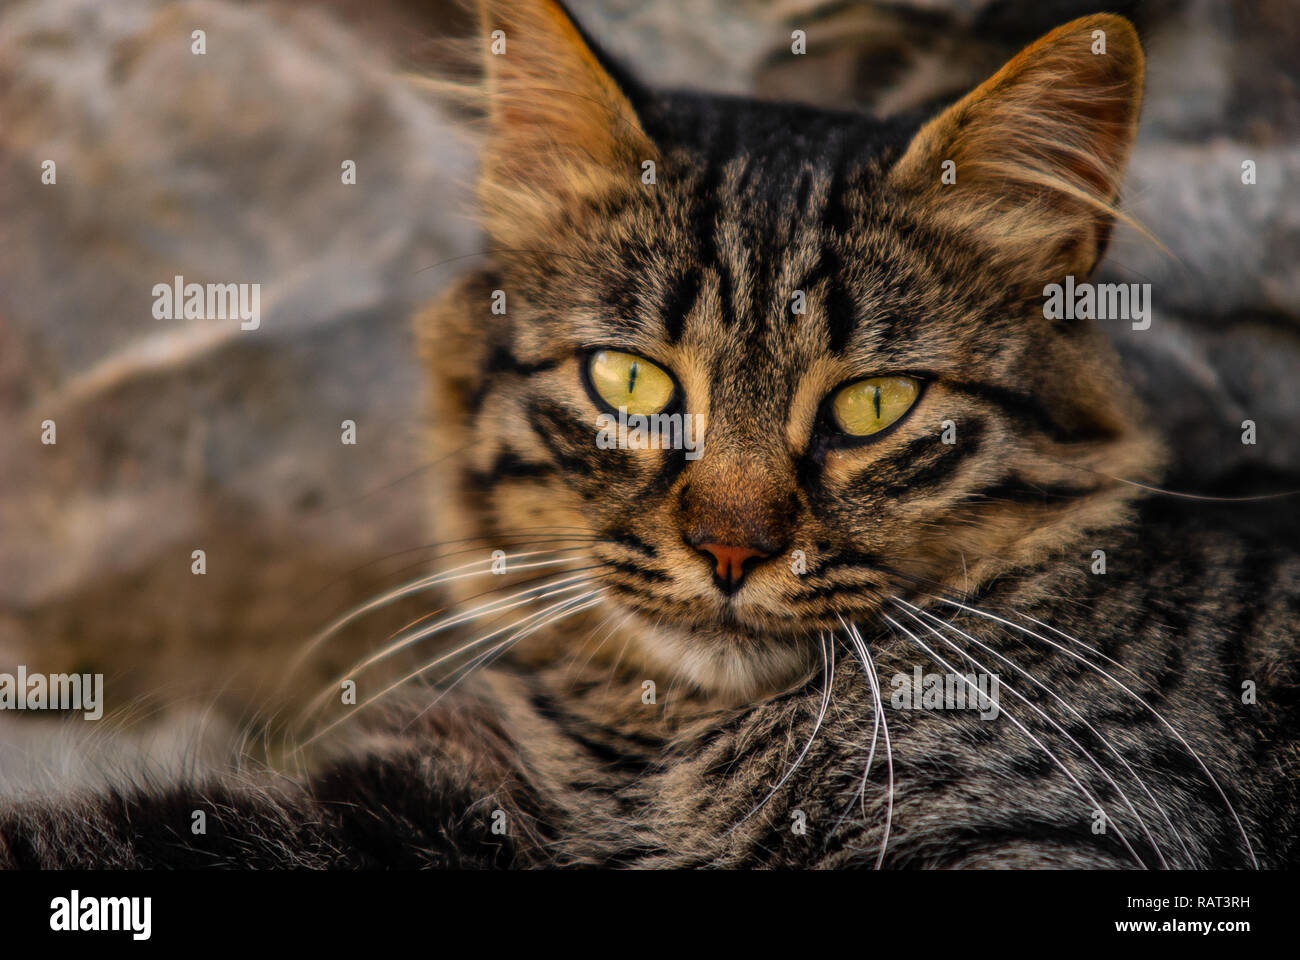 Details of a relaxed cat with amber eyes Stock Photo